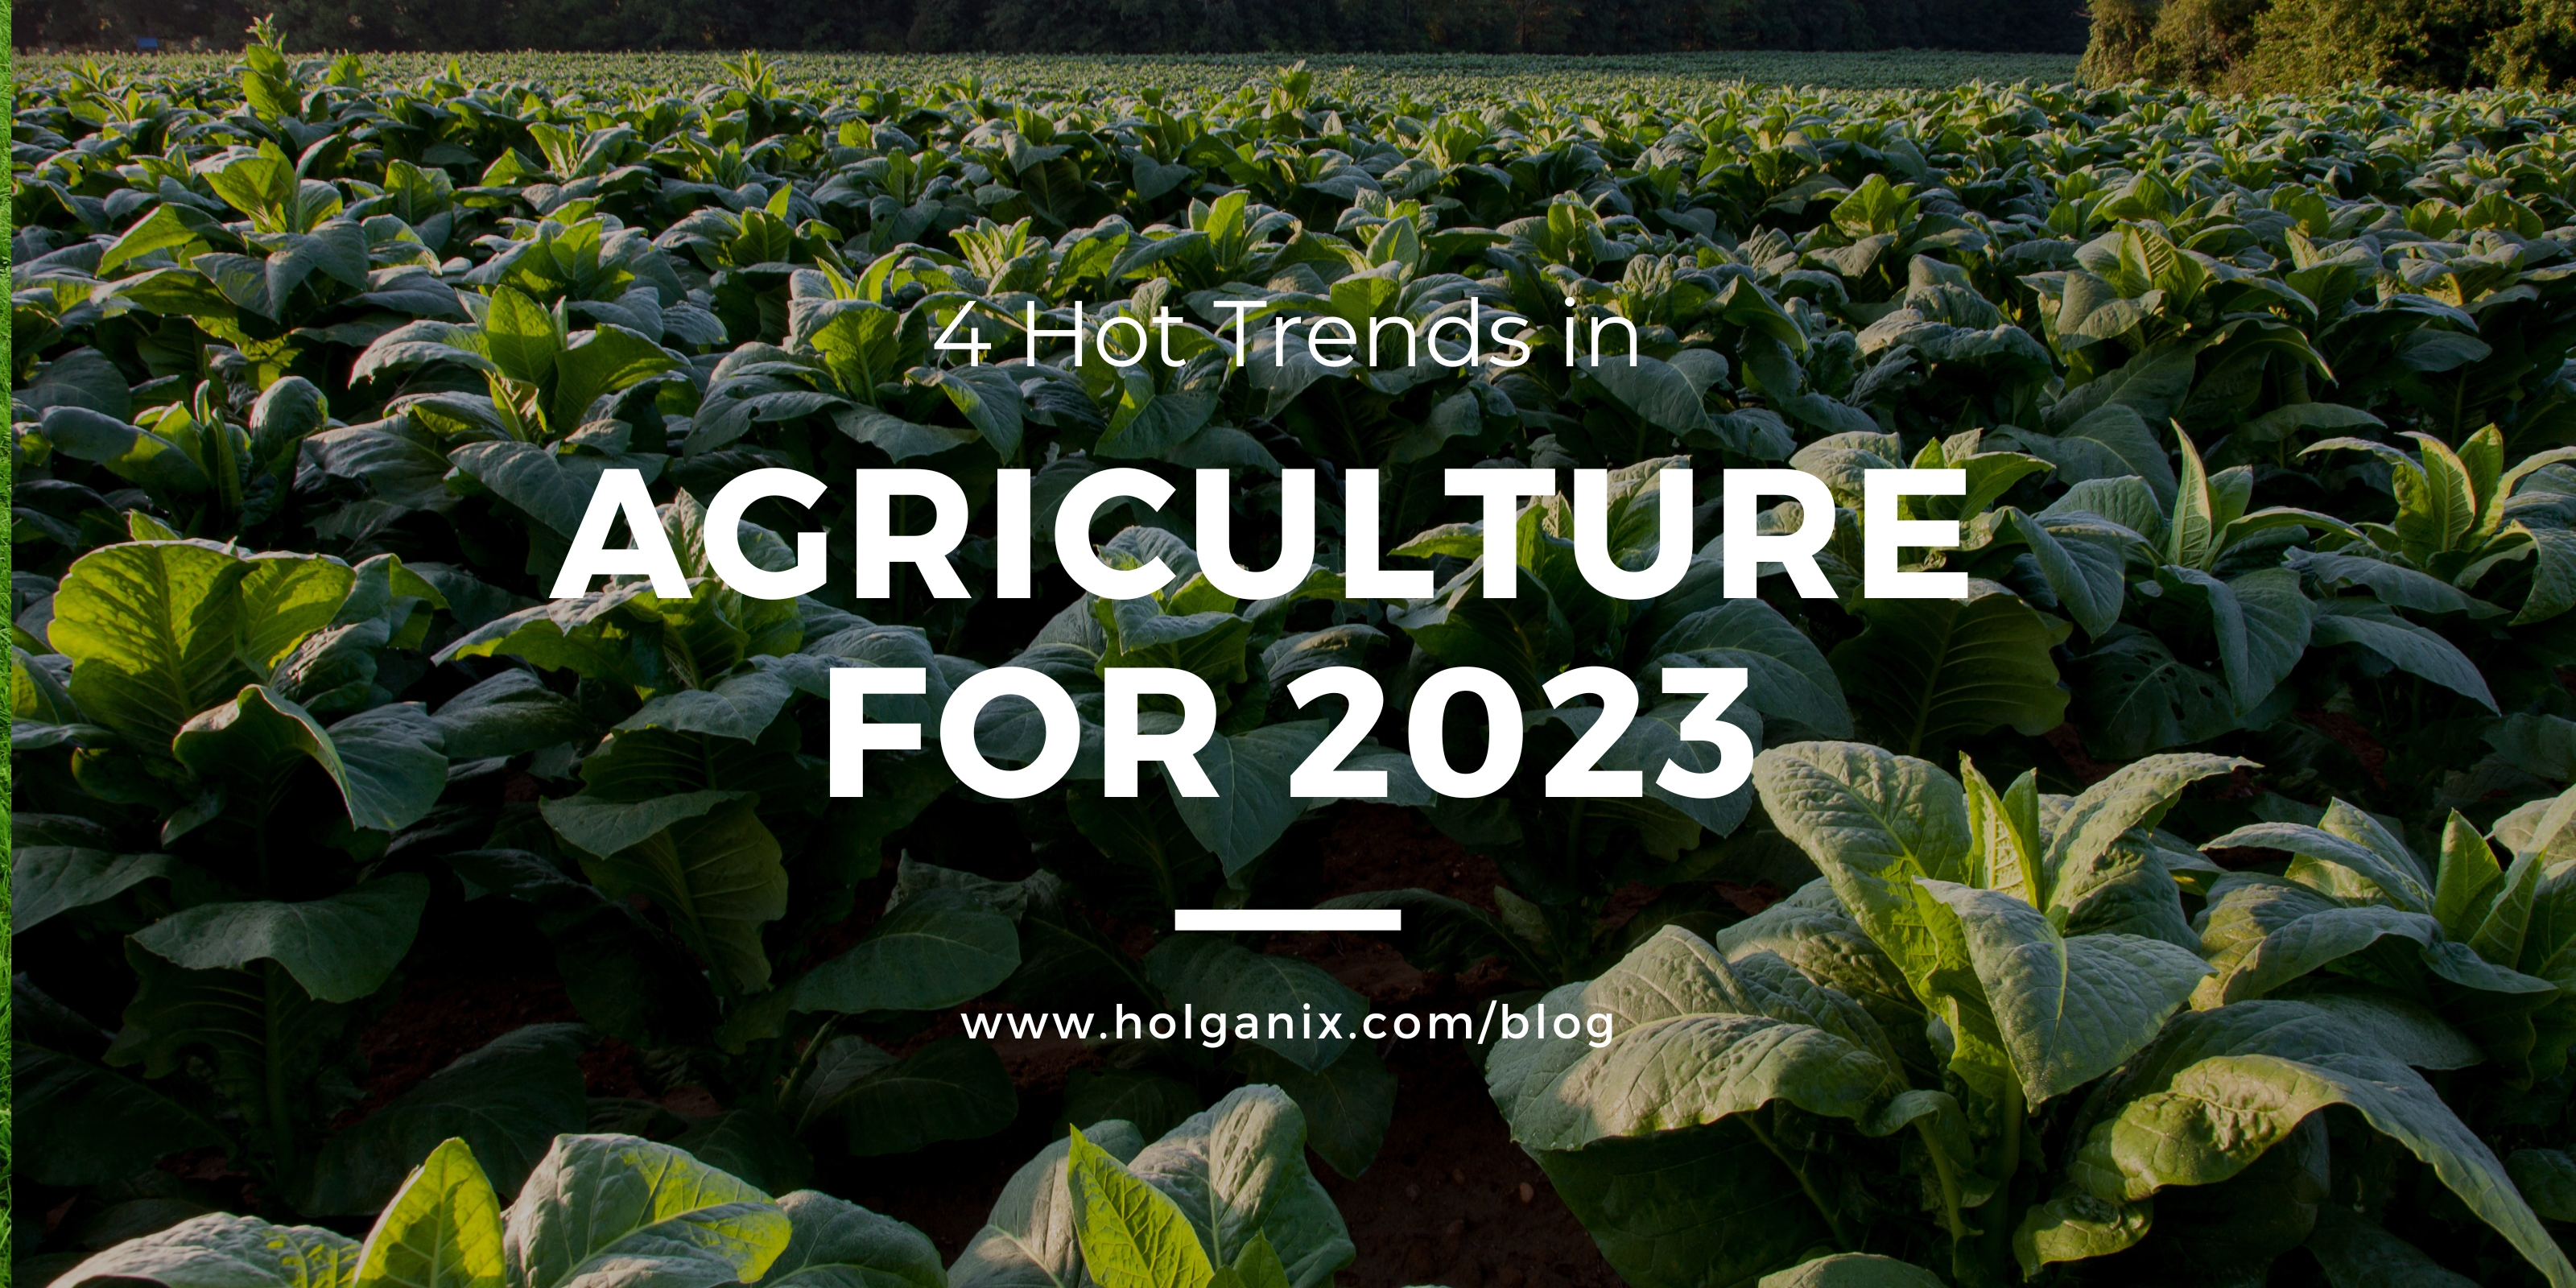 4 Hot Trends in Agriculture for 2023